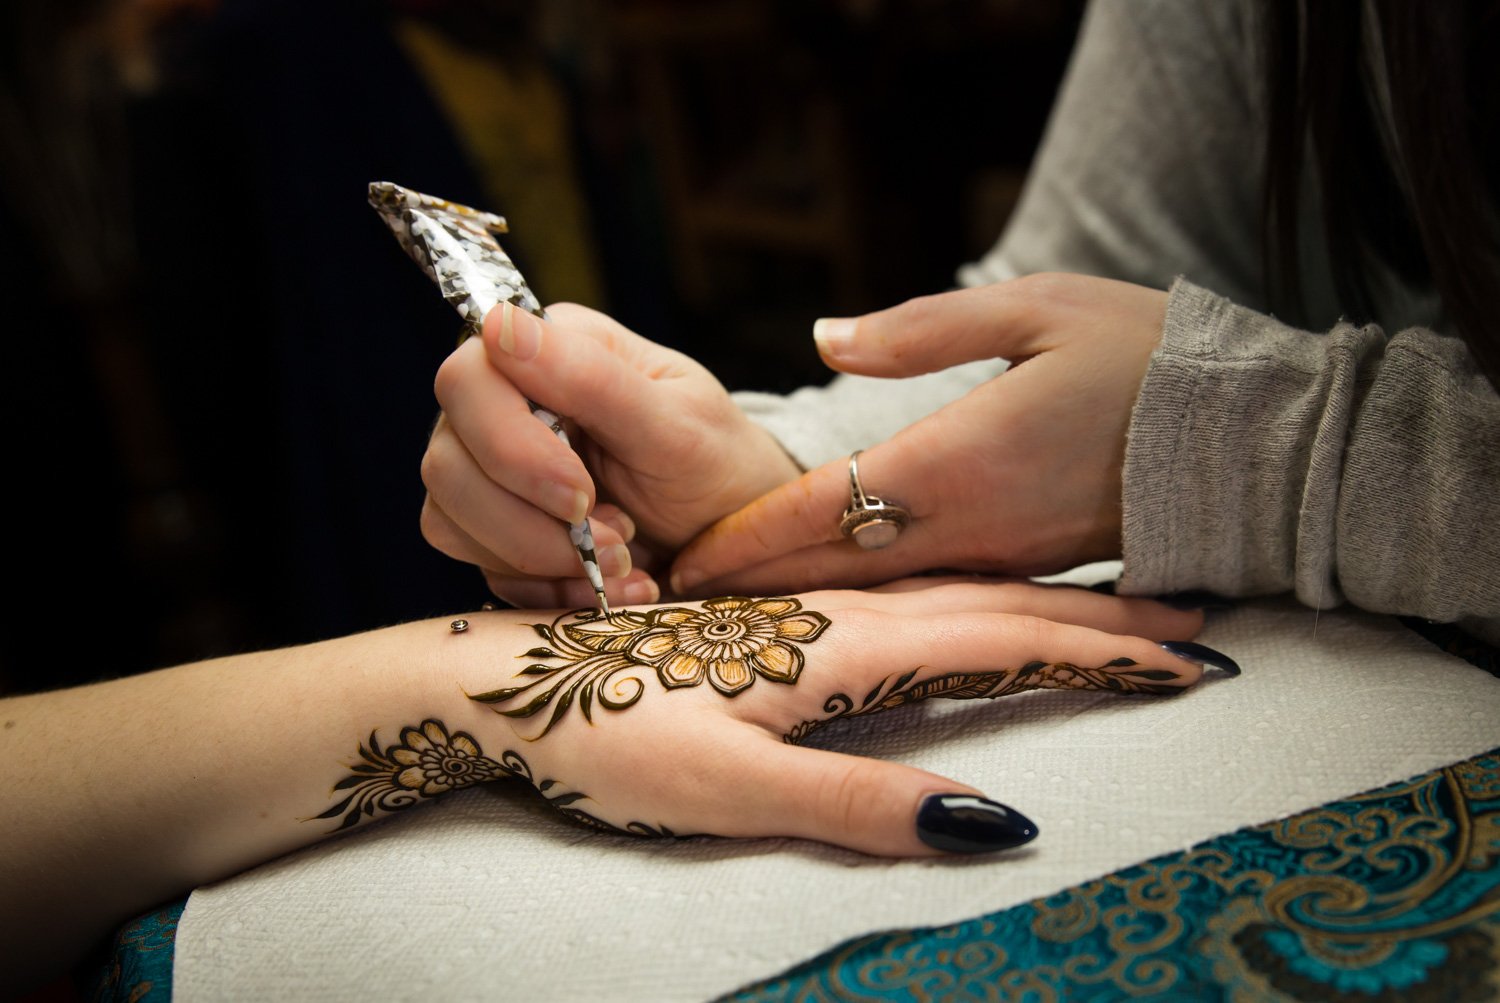 Where in Pune can I find a Mehndi artist? - Quora